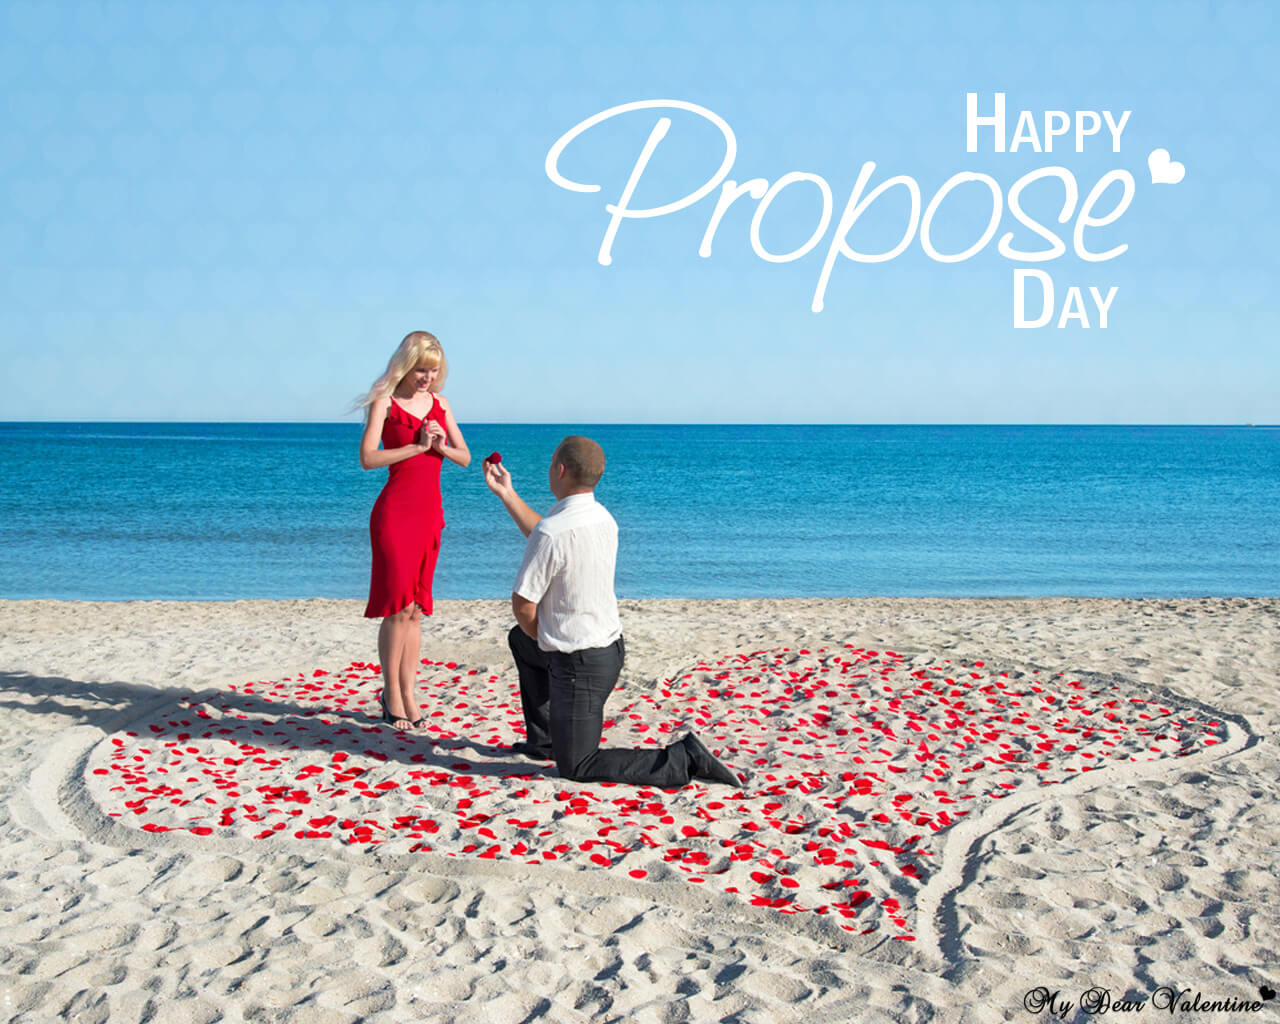 Propose Day Images Wallpapers - Happy Propose Day 2019 - HD Wallpaper 